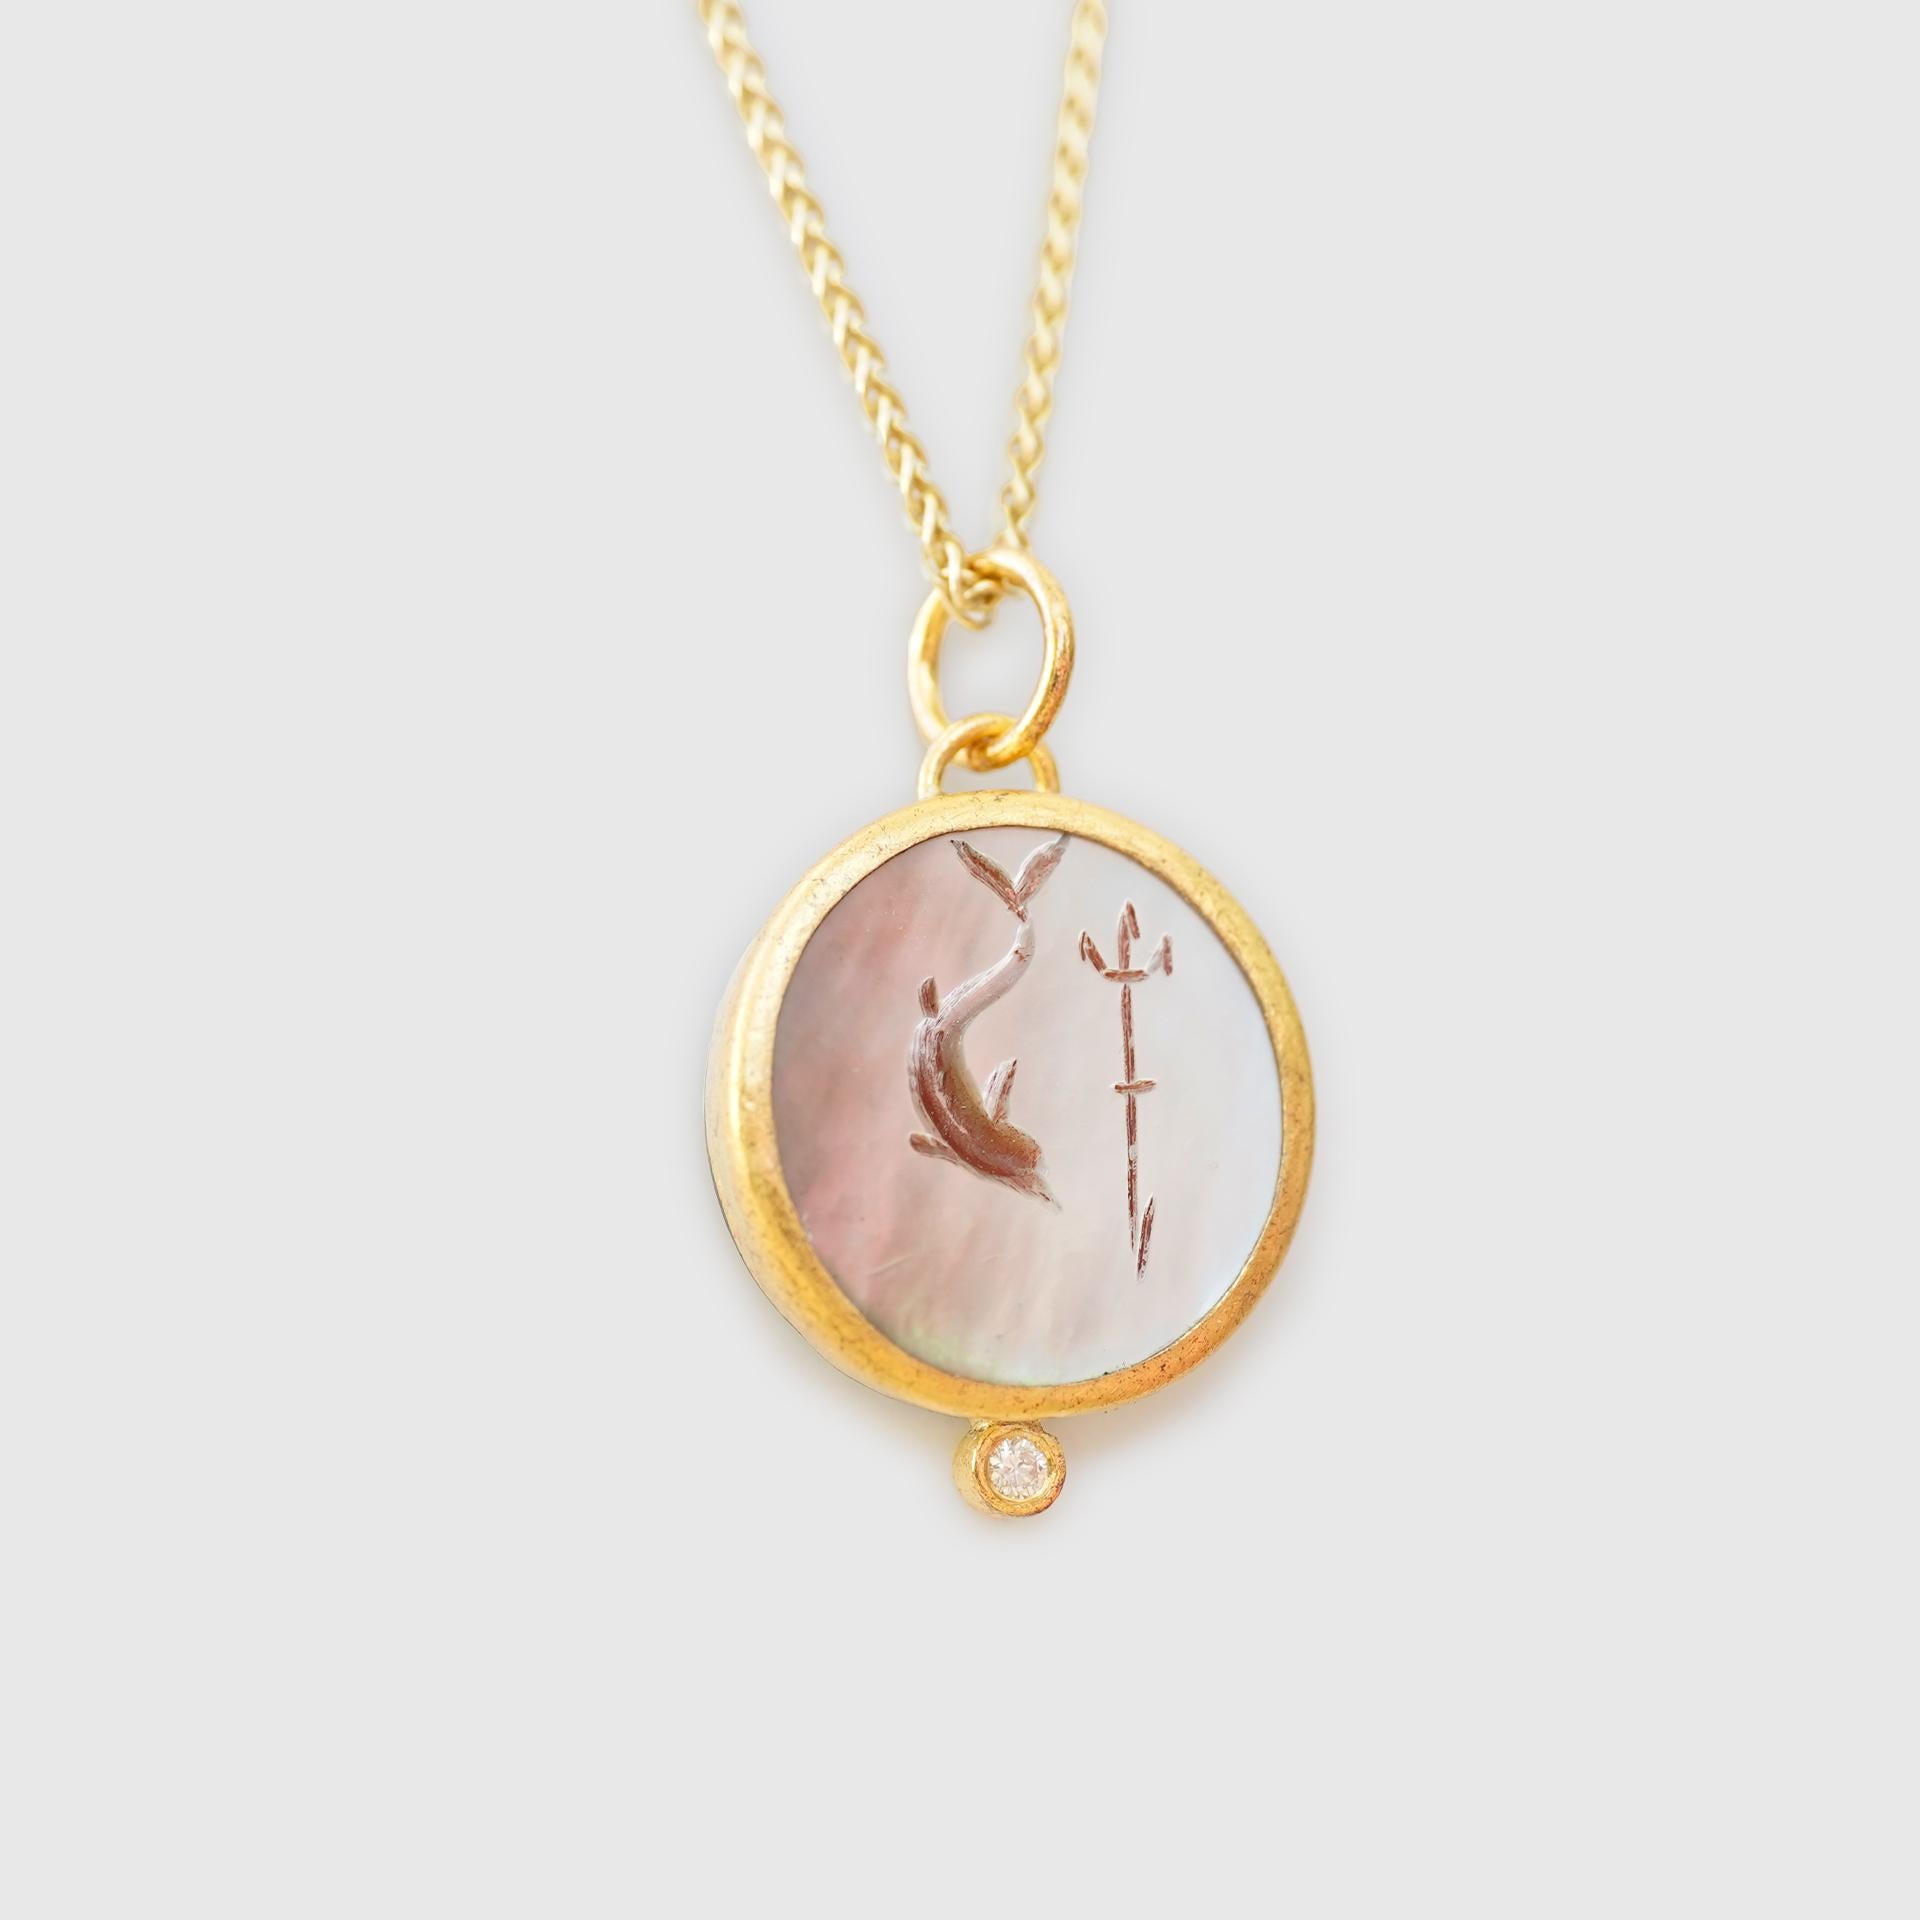 Poseidon, Arrow & Dolphin Intaglio Charm Pendant Necklace - 24kt Yellow Gold, Carved Mother of Pearl with Diamond & Silver

Comes with 16